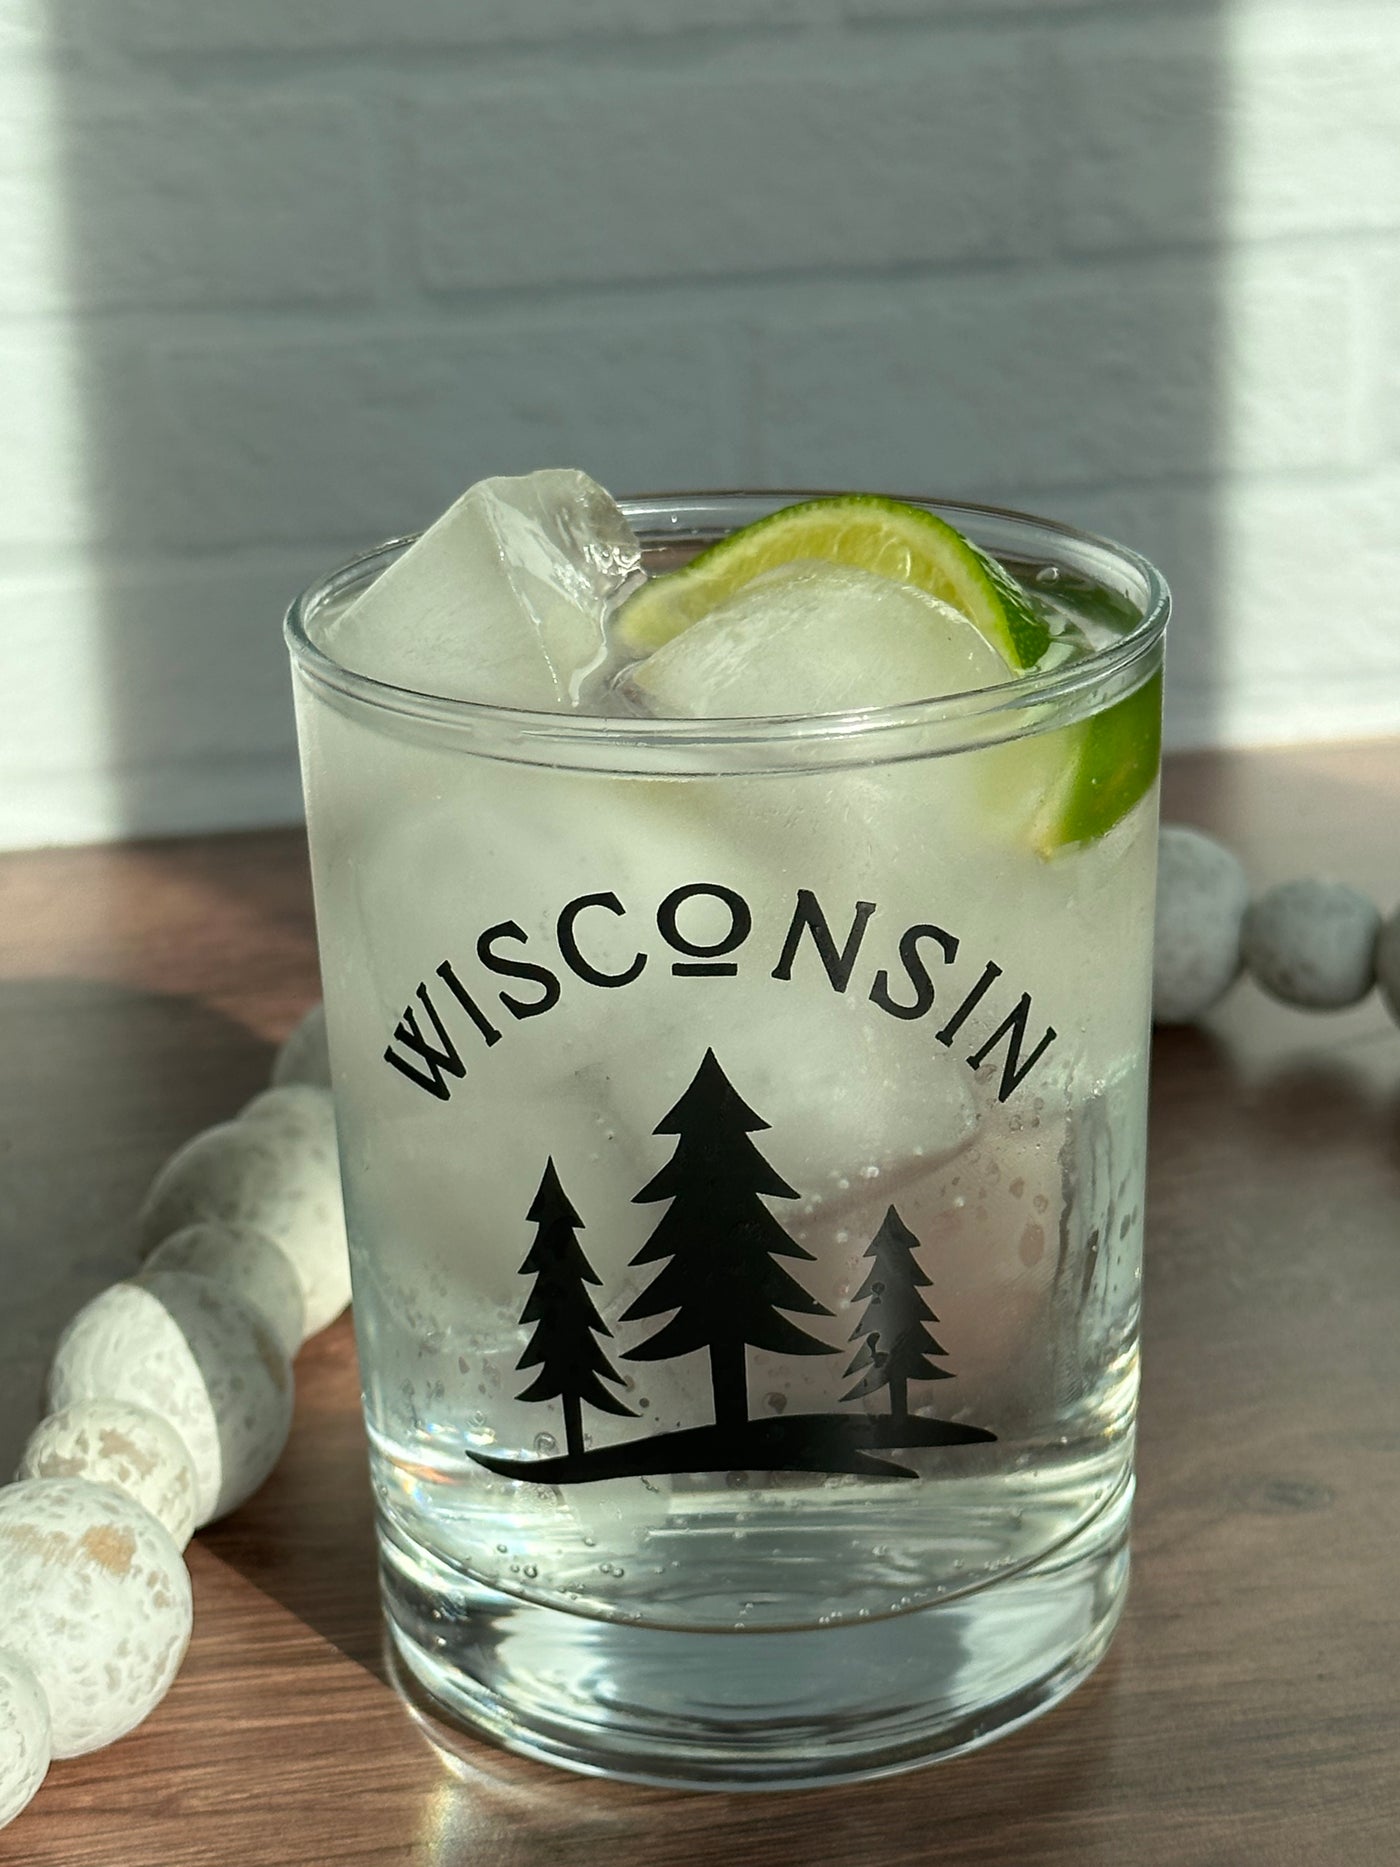 Three Tree Wisconsin double old fashioned glass